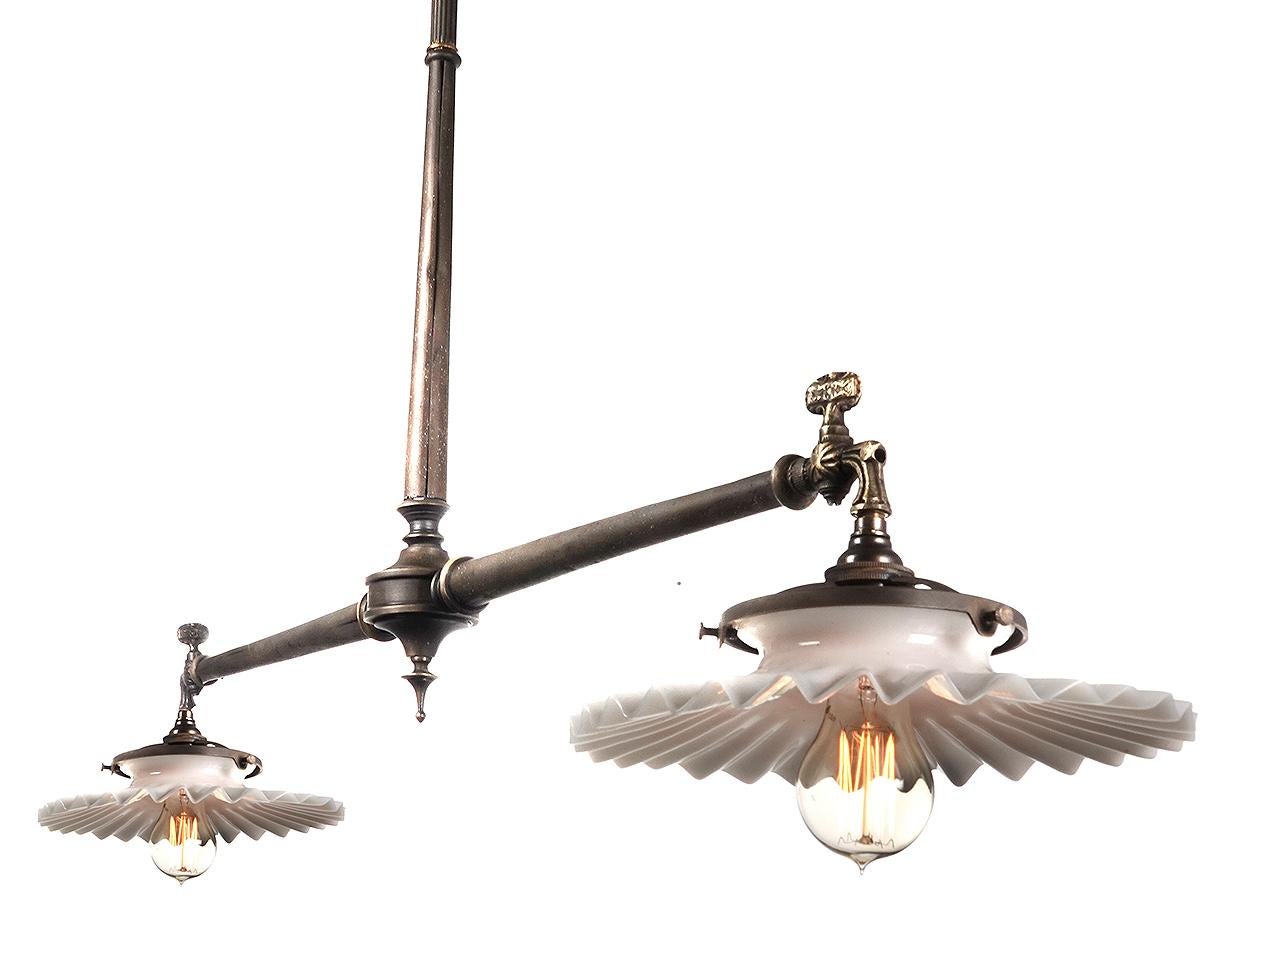 This was the type of double lamp found over store counters from the mid to late 1800. They were simple, utilitarian but still very stylish in detail. This example was refitted to now take a candelabra bulb. It spans an 3 foot and uses two original